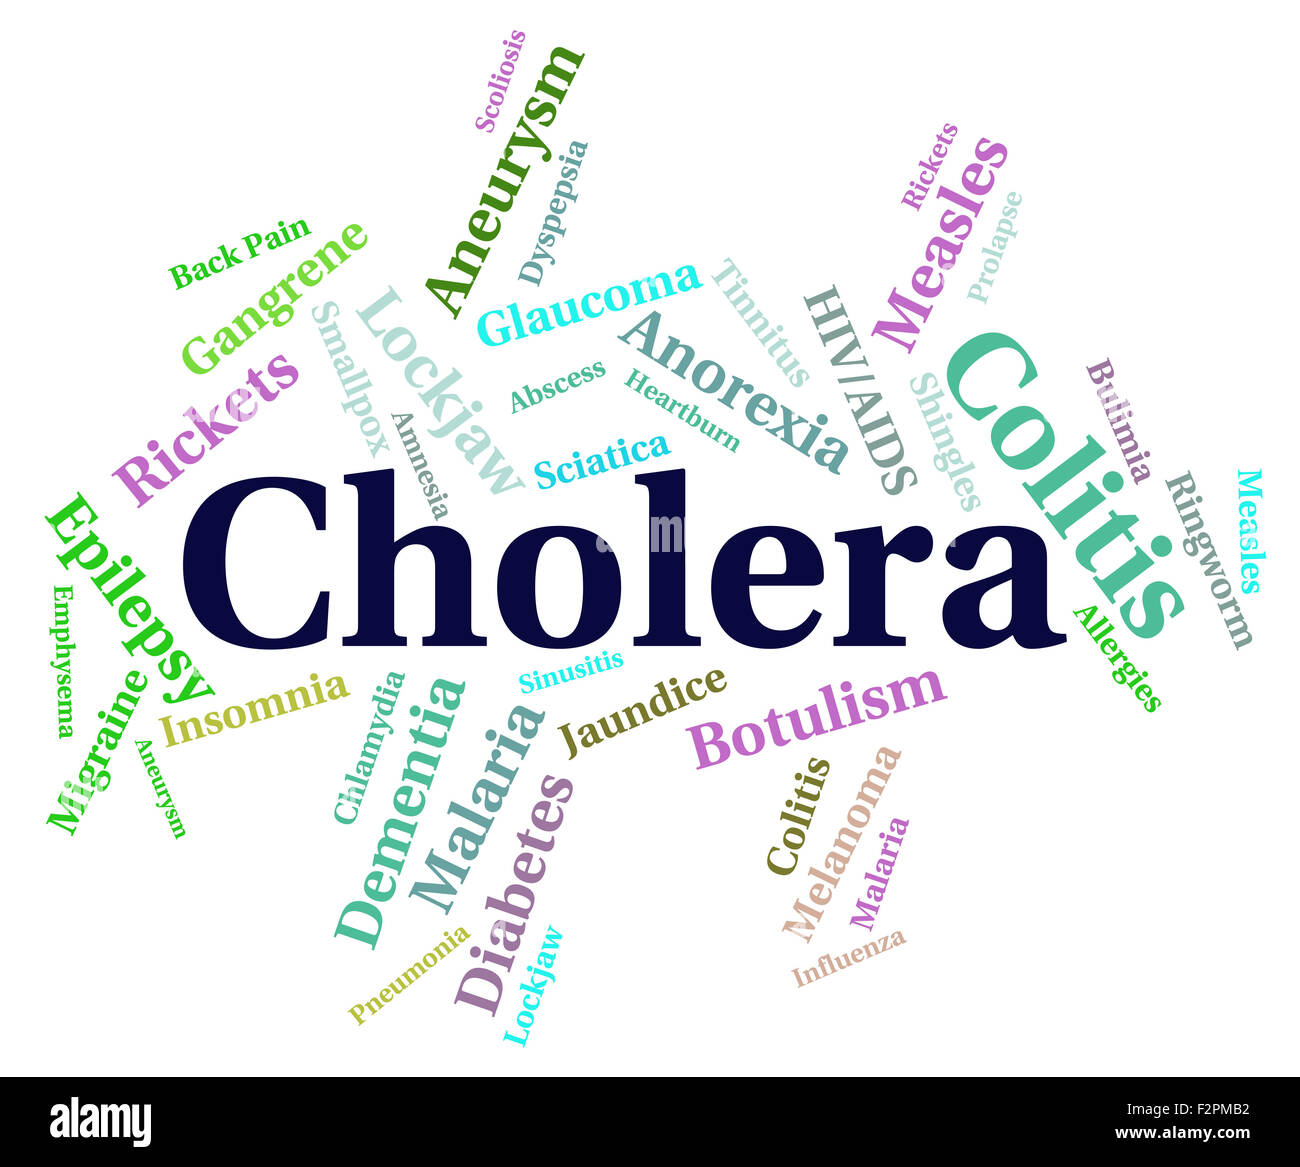 Cholera Disease Showing Poor Health And Word Stock Photo